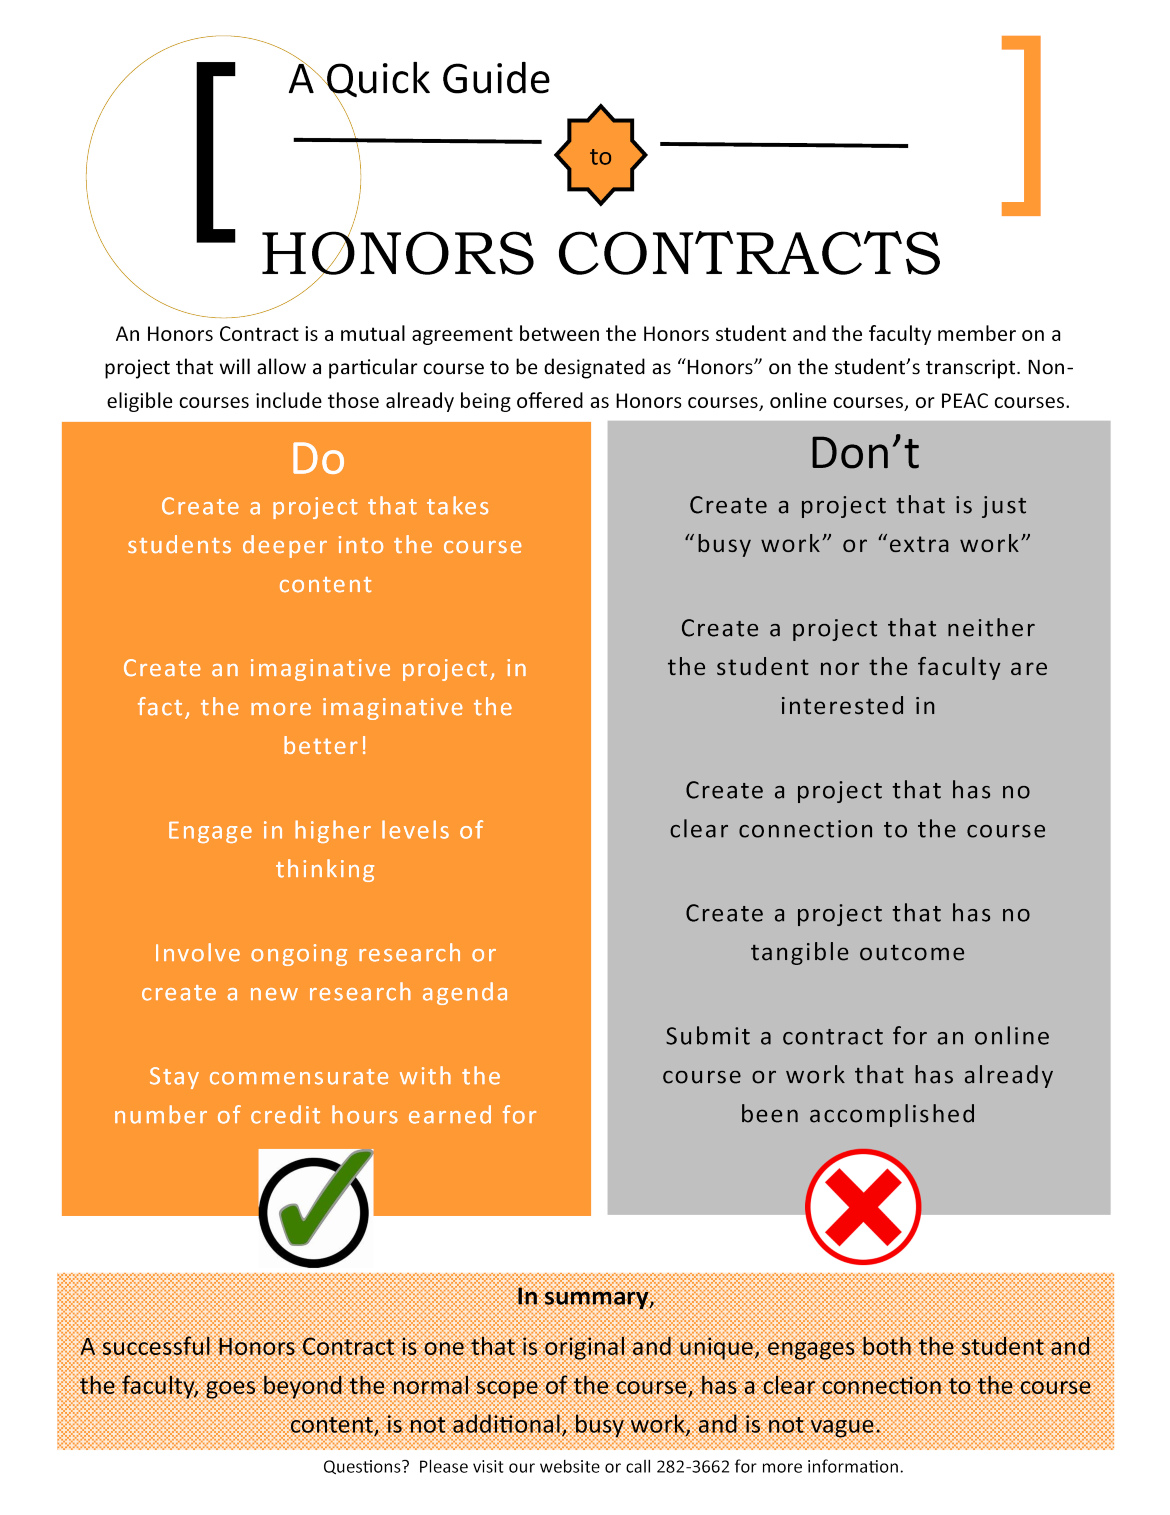 Contract Do's and Don'ts